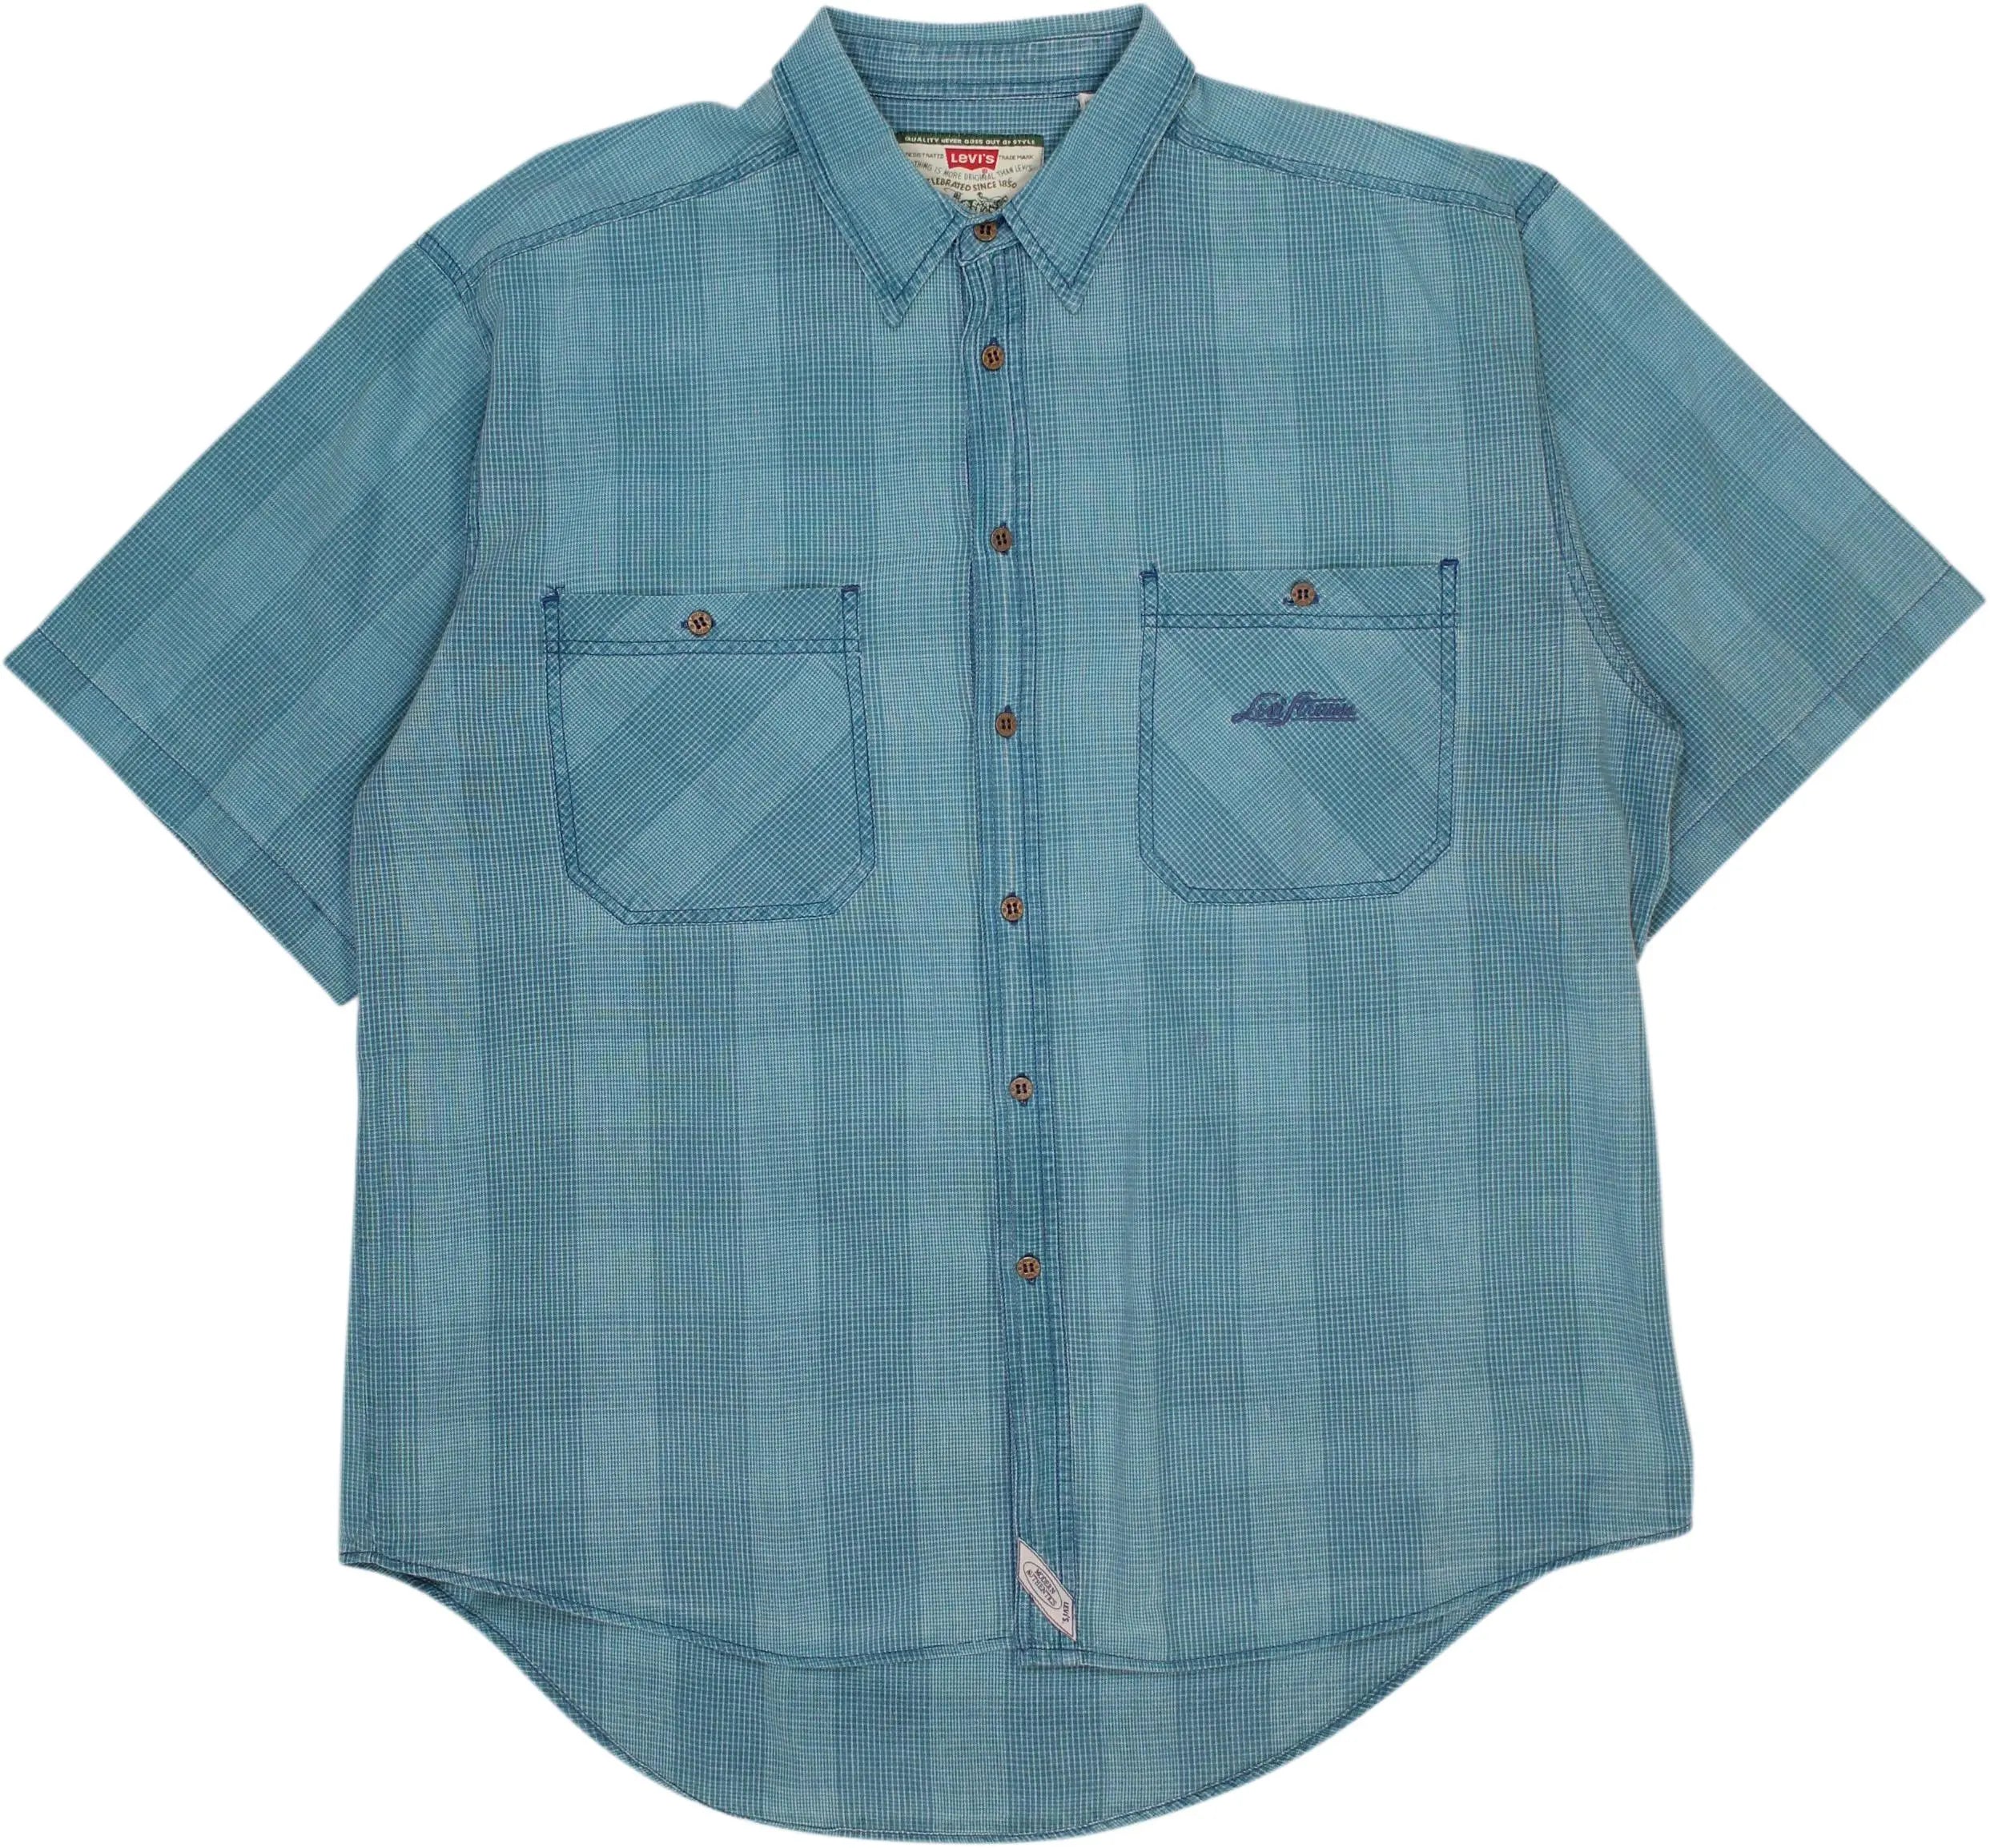 Levi's - Vintage Blue Short Sleeve Shirt by Levi's- ThriftTale.com - Vintage and second handclothing